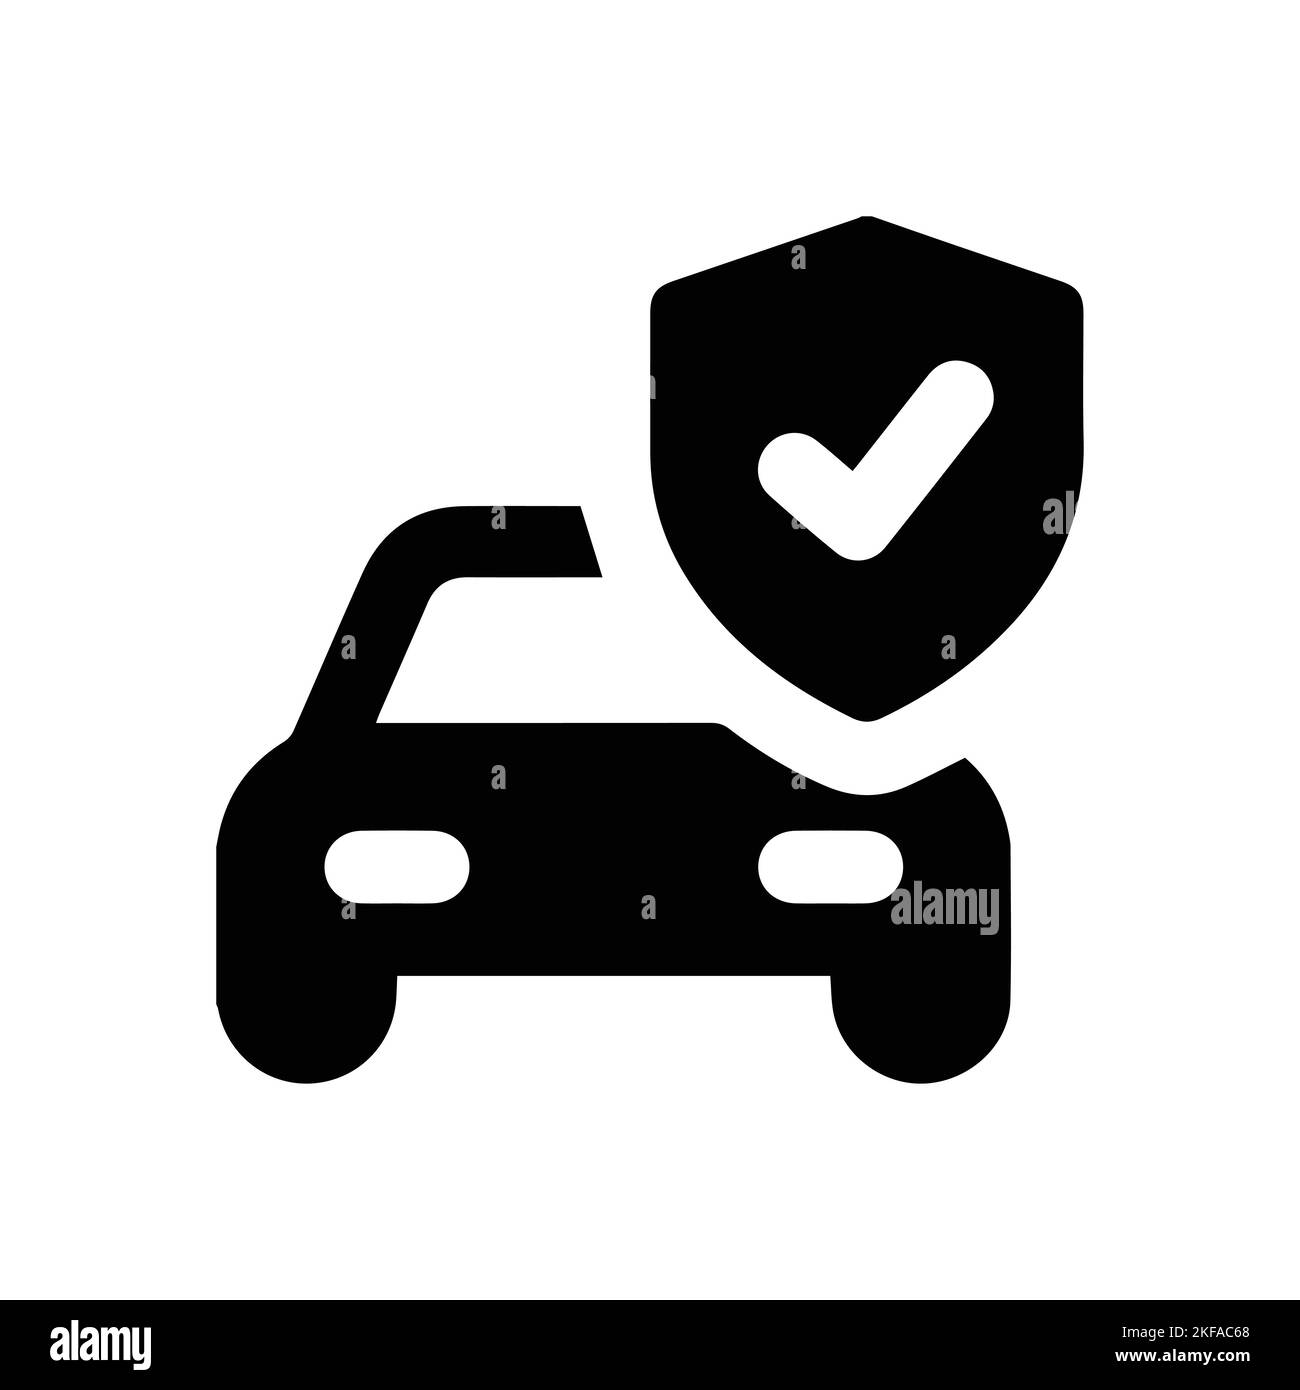 Simple Car Icon Vector. Flat Hatchback symbol. Perfect Black pictogram illustration on white background. Stock Vector